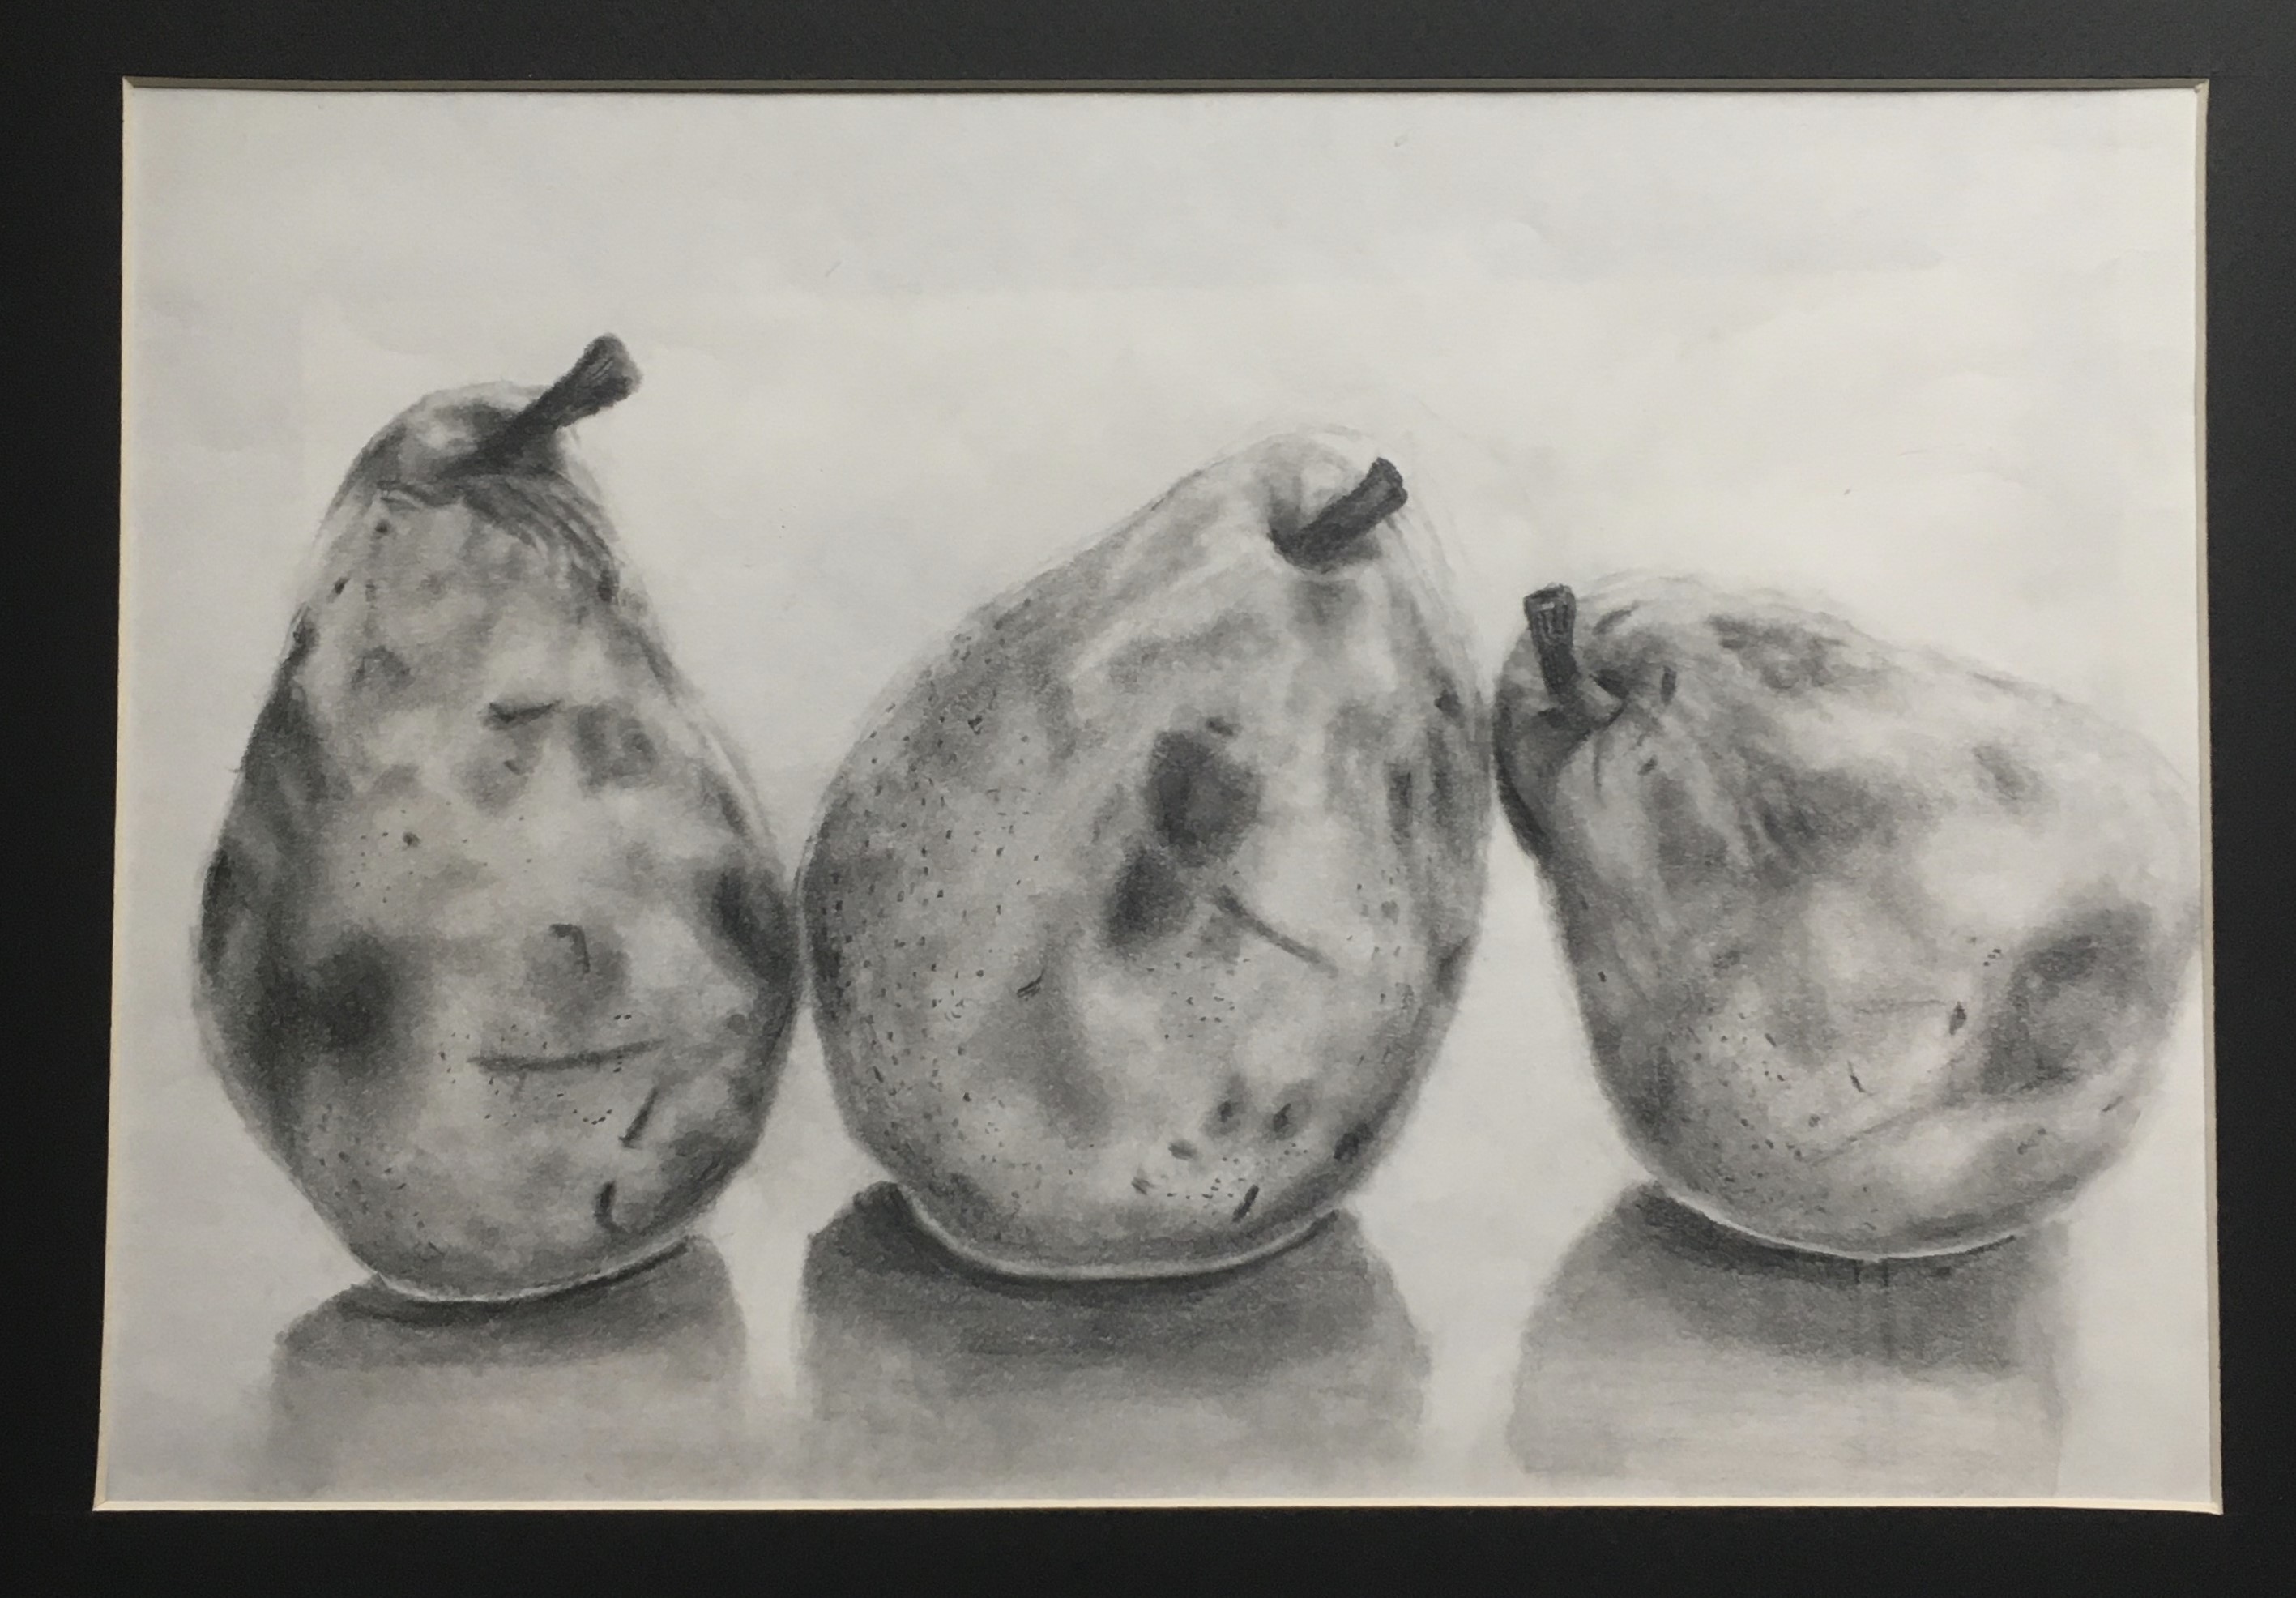 An illustration of three pears.